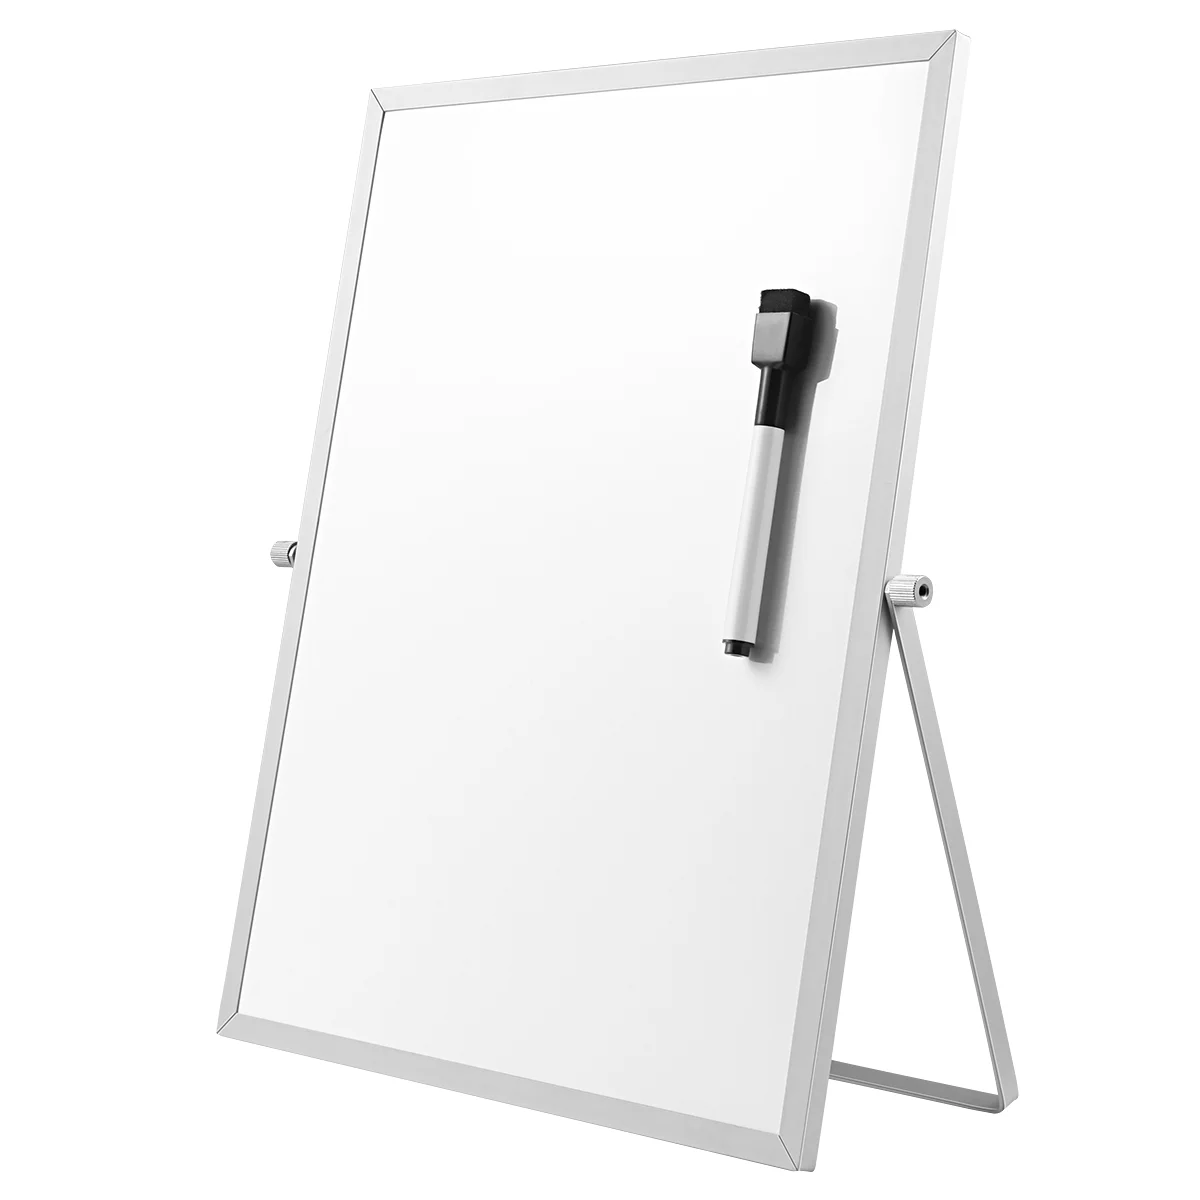 

STOBOK Magnetic Dry Erase Board Double Sided Personal Desktop Tabletop White Board Planner Reminder with Stand for School Office